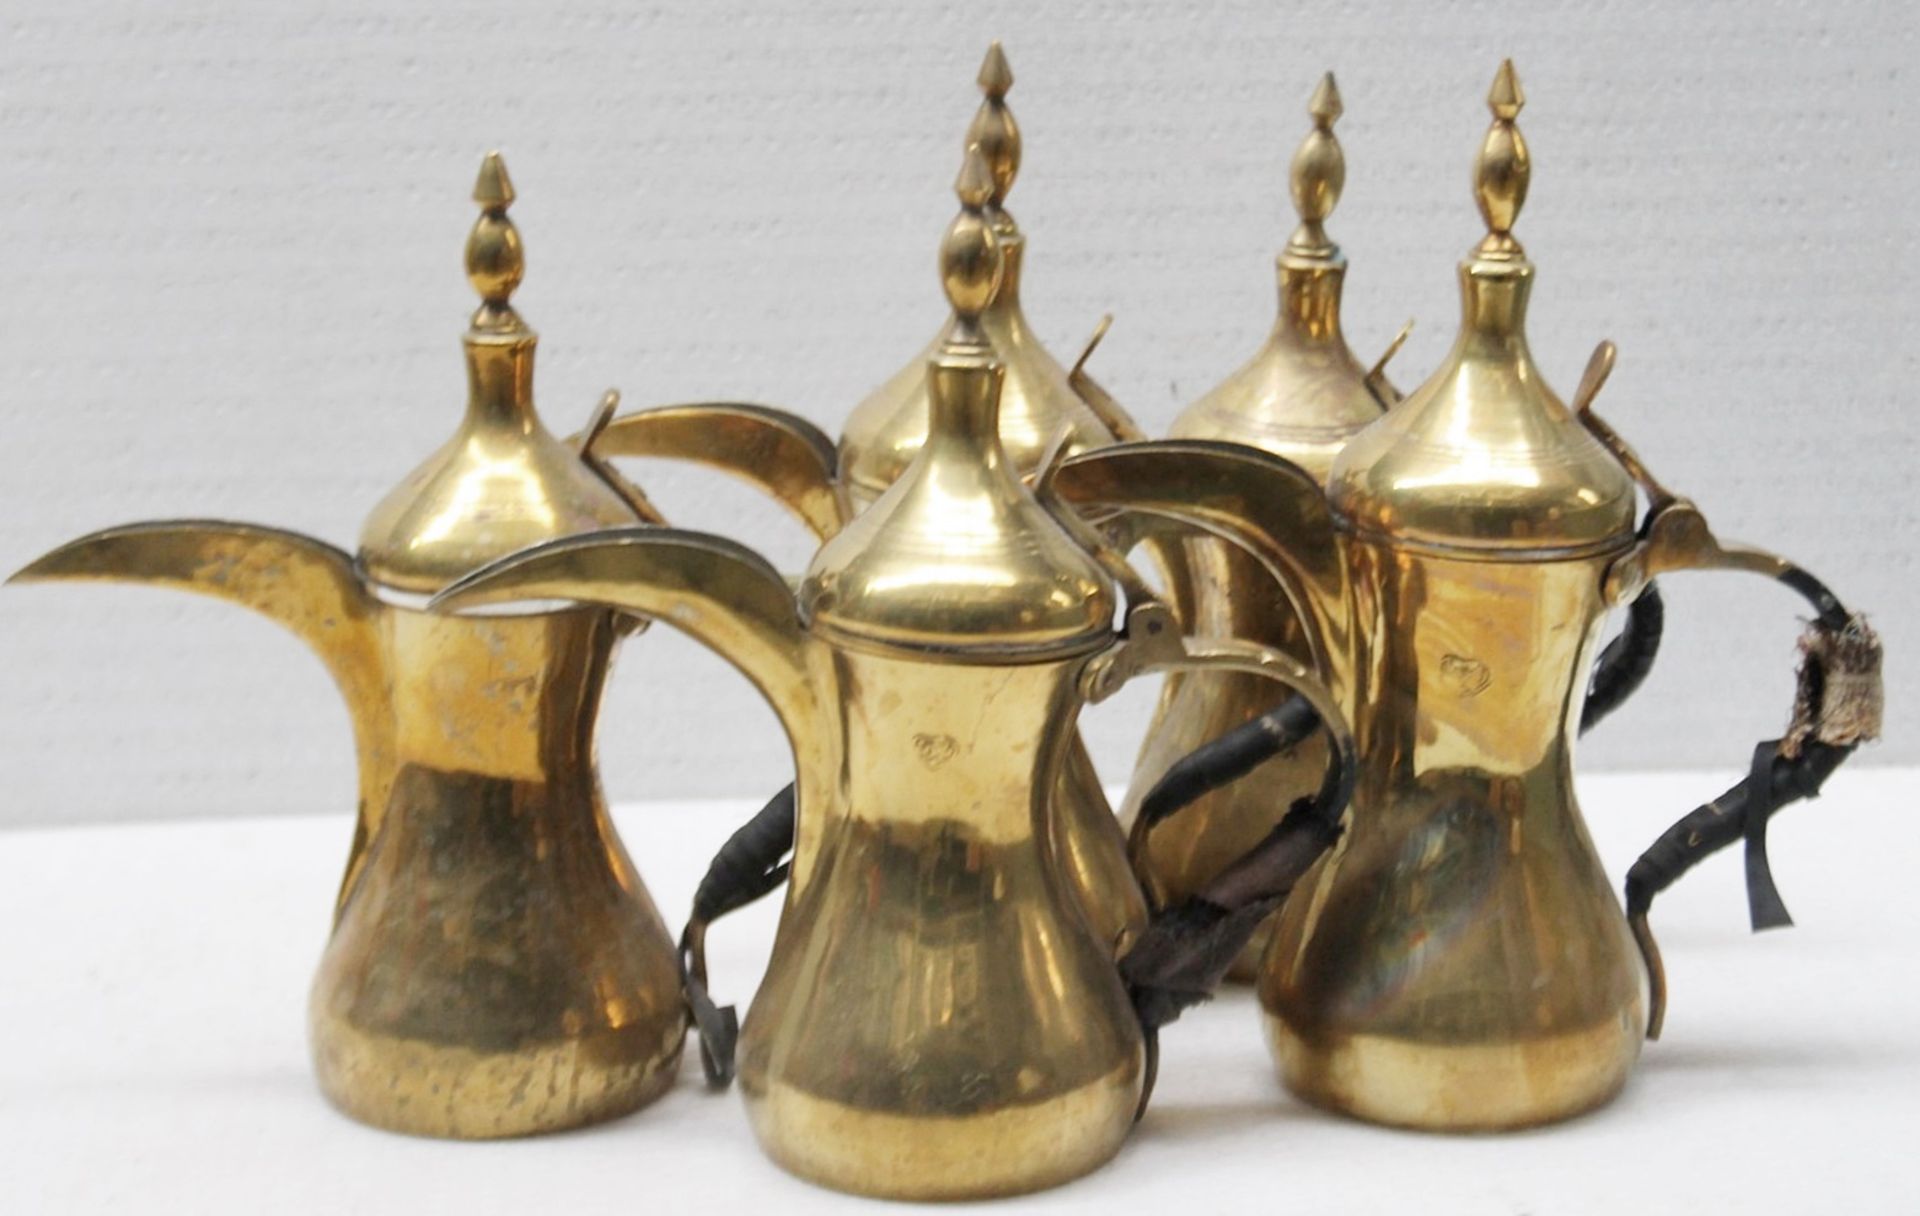 5 x Vintage Brass Arabic Dallah Coffee Pots - Recently Removed From A Well-known London Department - Image 4 of 5